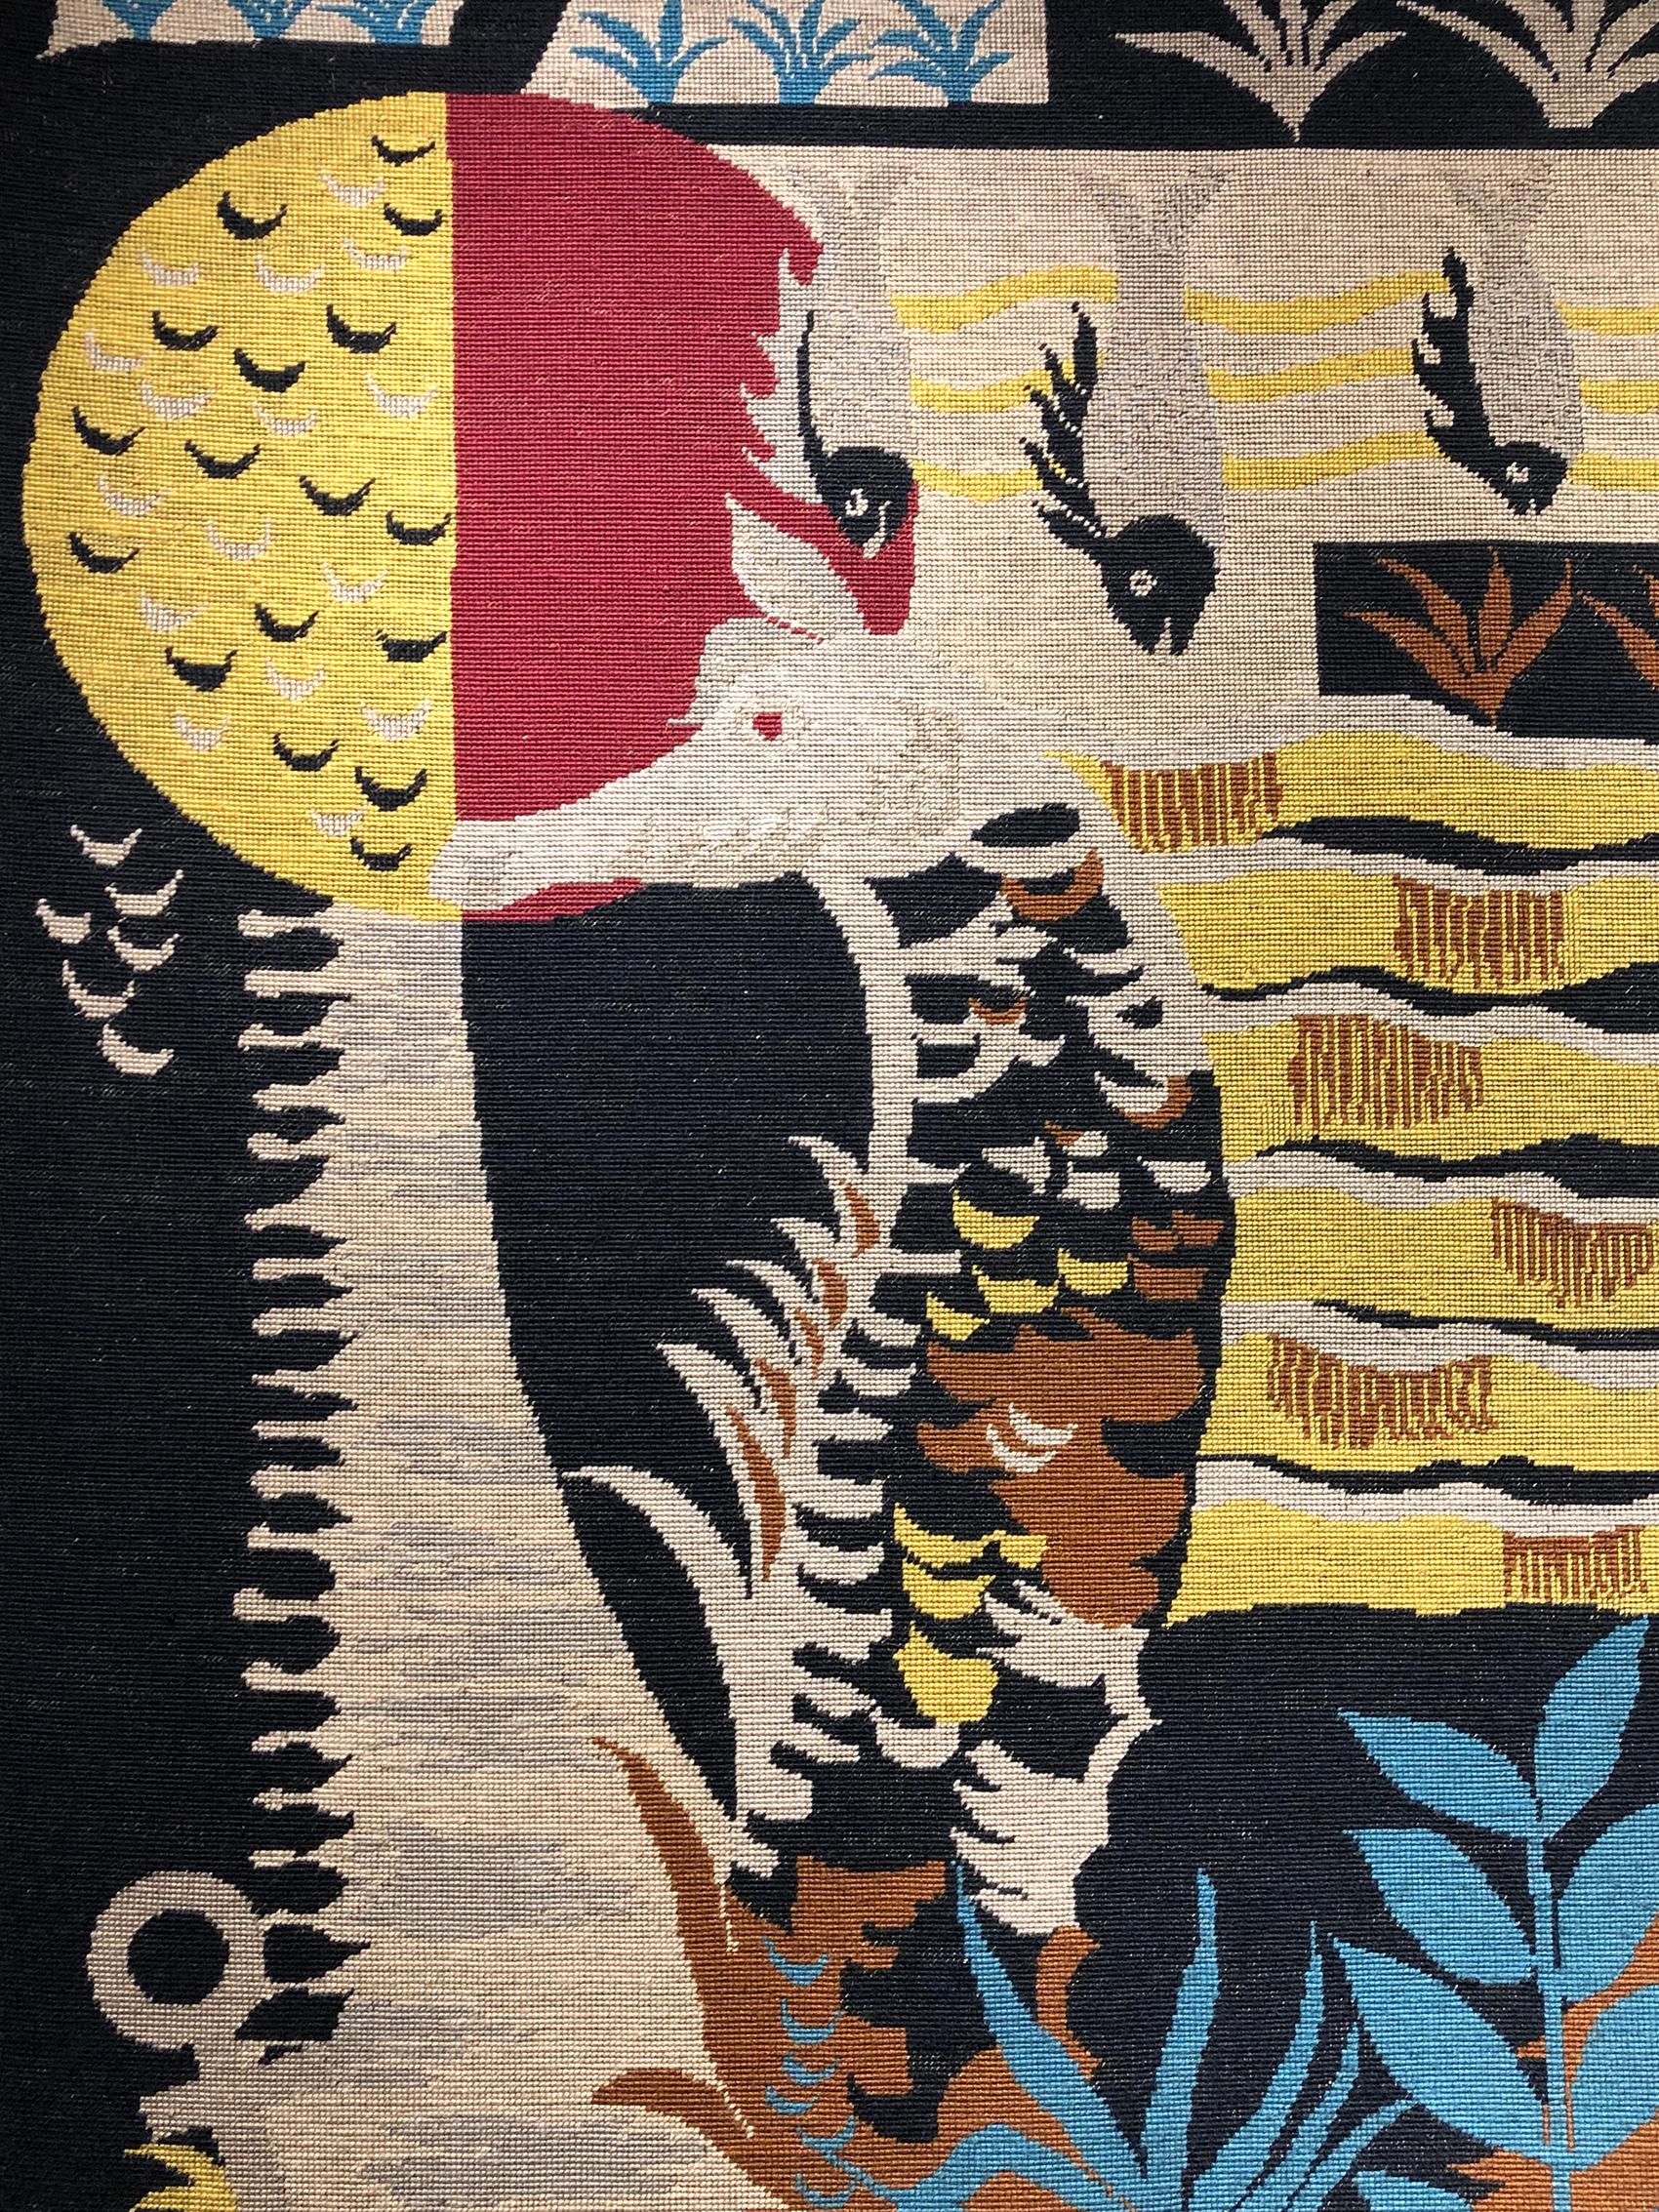 Exquisite midcentury tapestry attributed to Jean Lurcat (1892-1966).
Entitled “Maritime”.
Depicting a bold surrealism marine landscape with a sea horse surrounding by an anchor, Pisces and plants.
Woven needlepoint on canvas (wool yarn on the